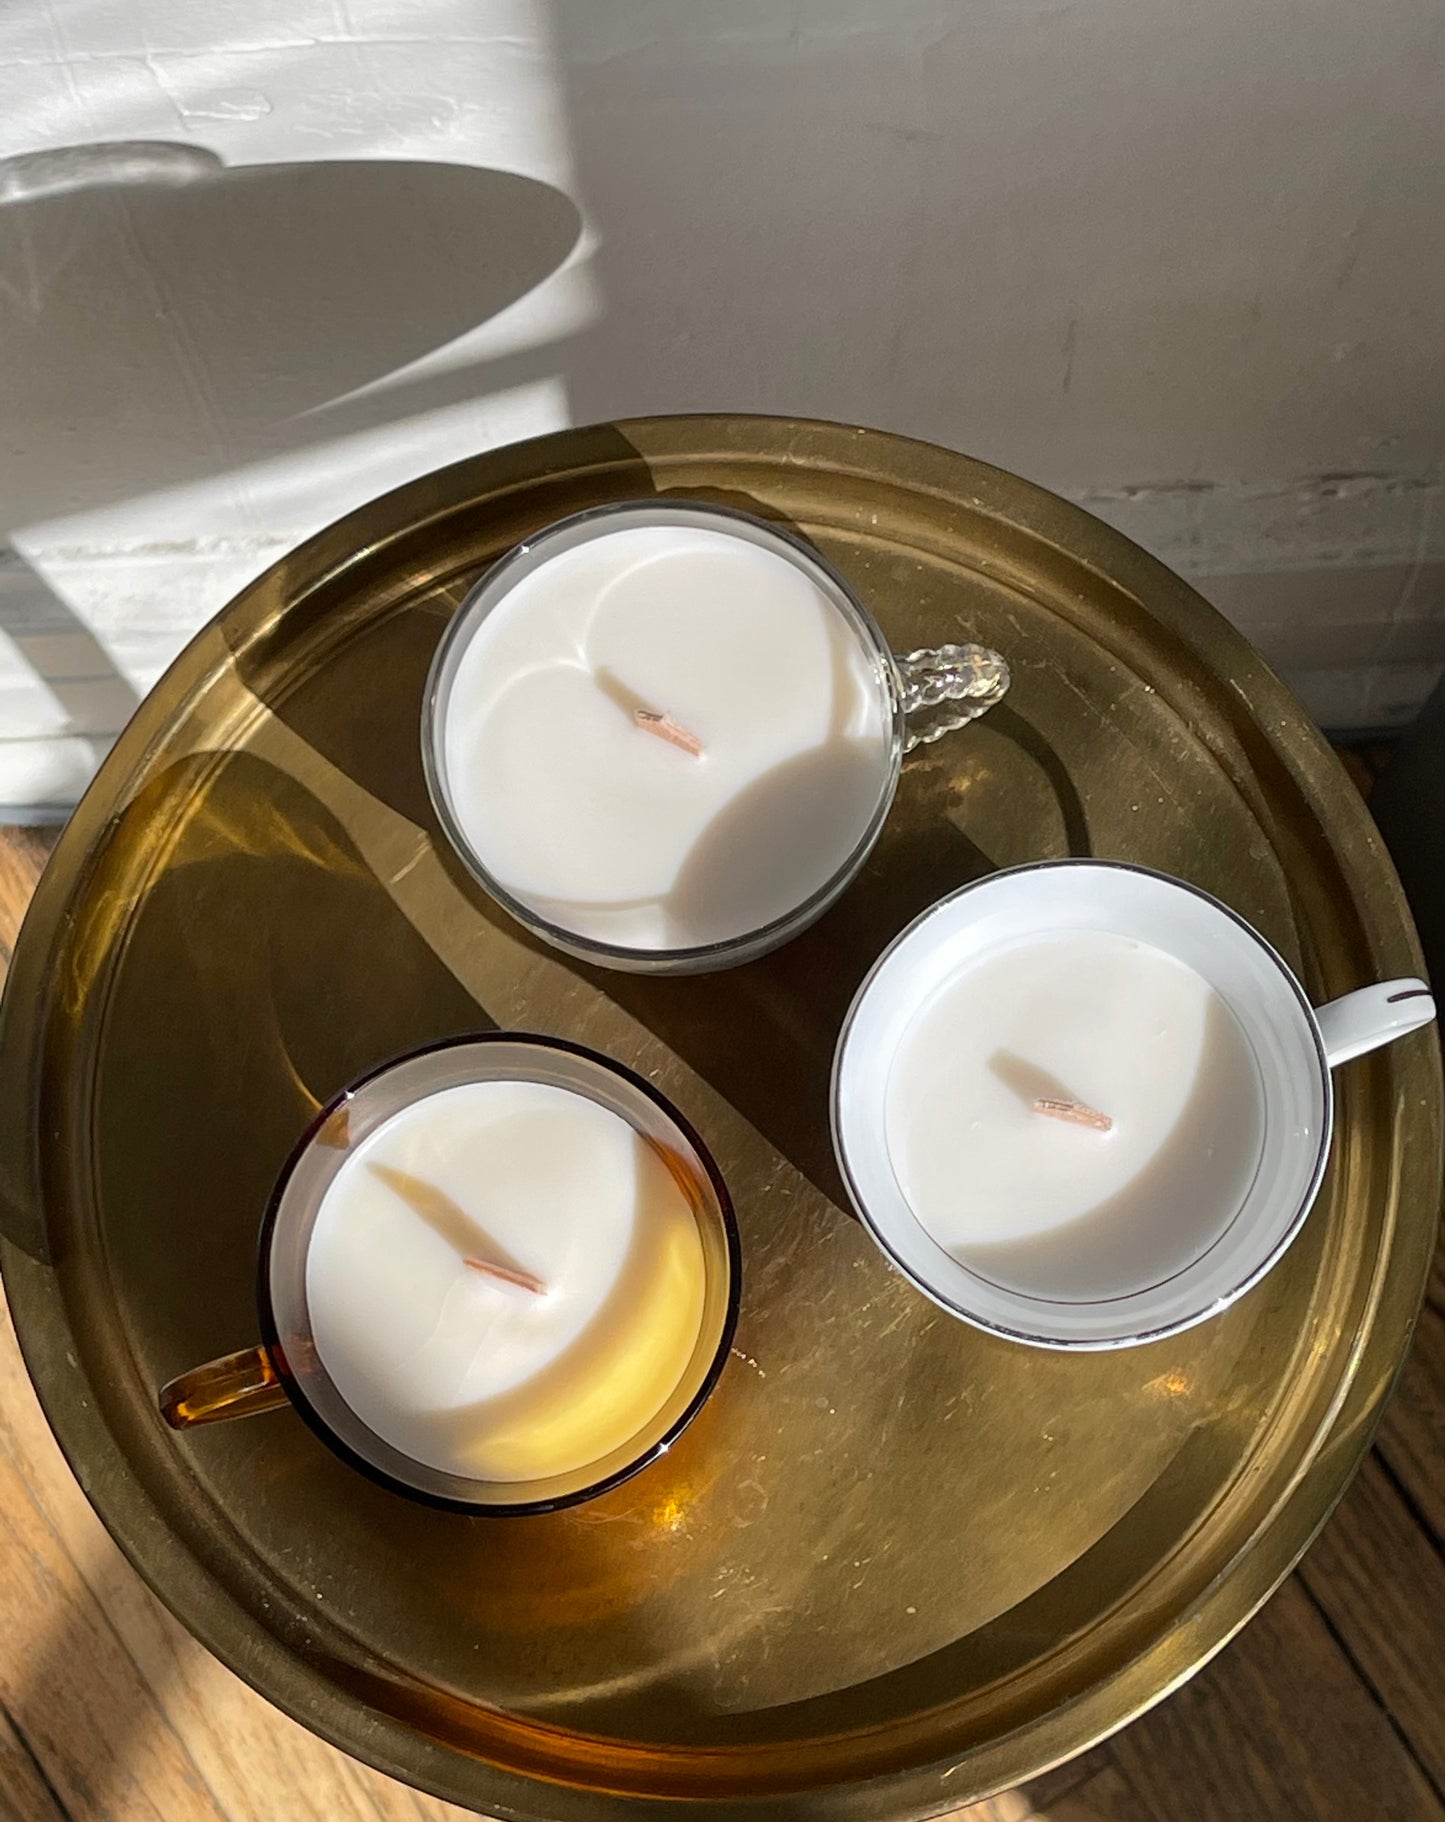 hand-crafted candle, w/ amber teacup + saucer